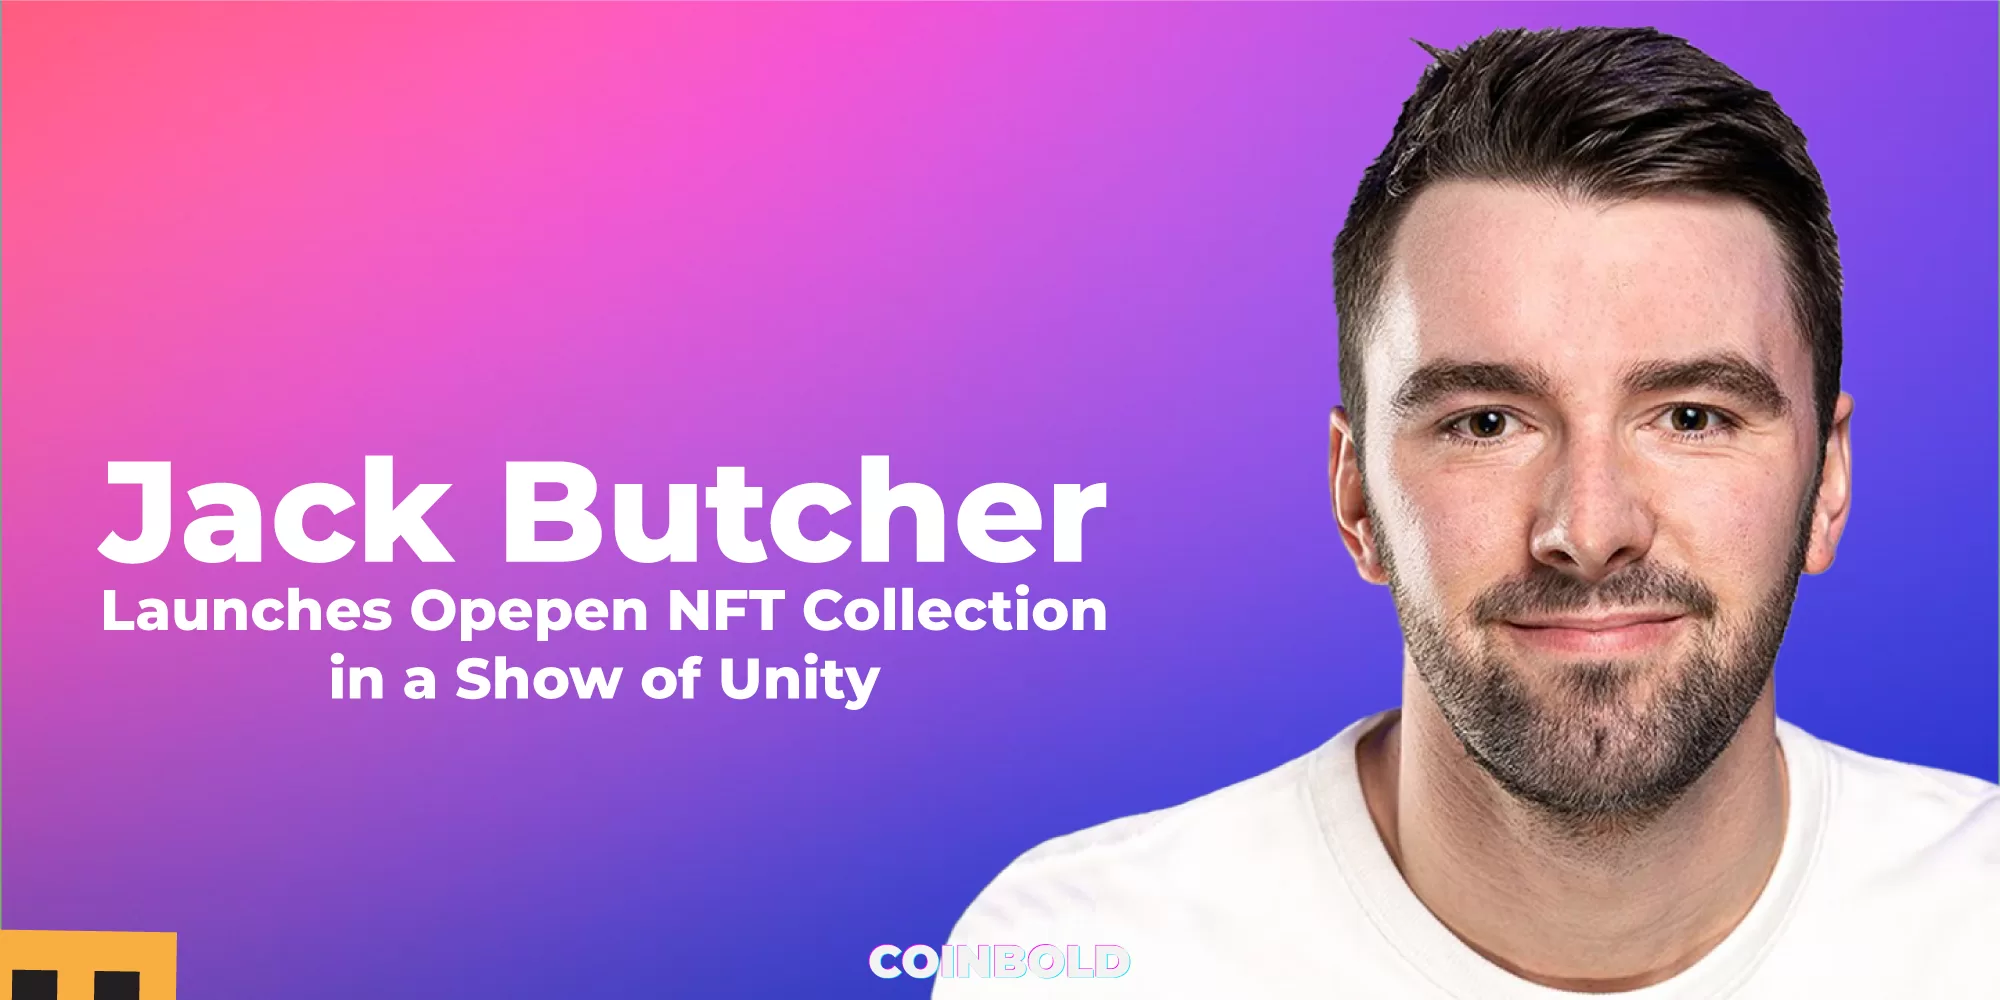 Jack Butcher Launches Opepen NFT Collection in a Show of Unity